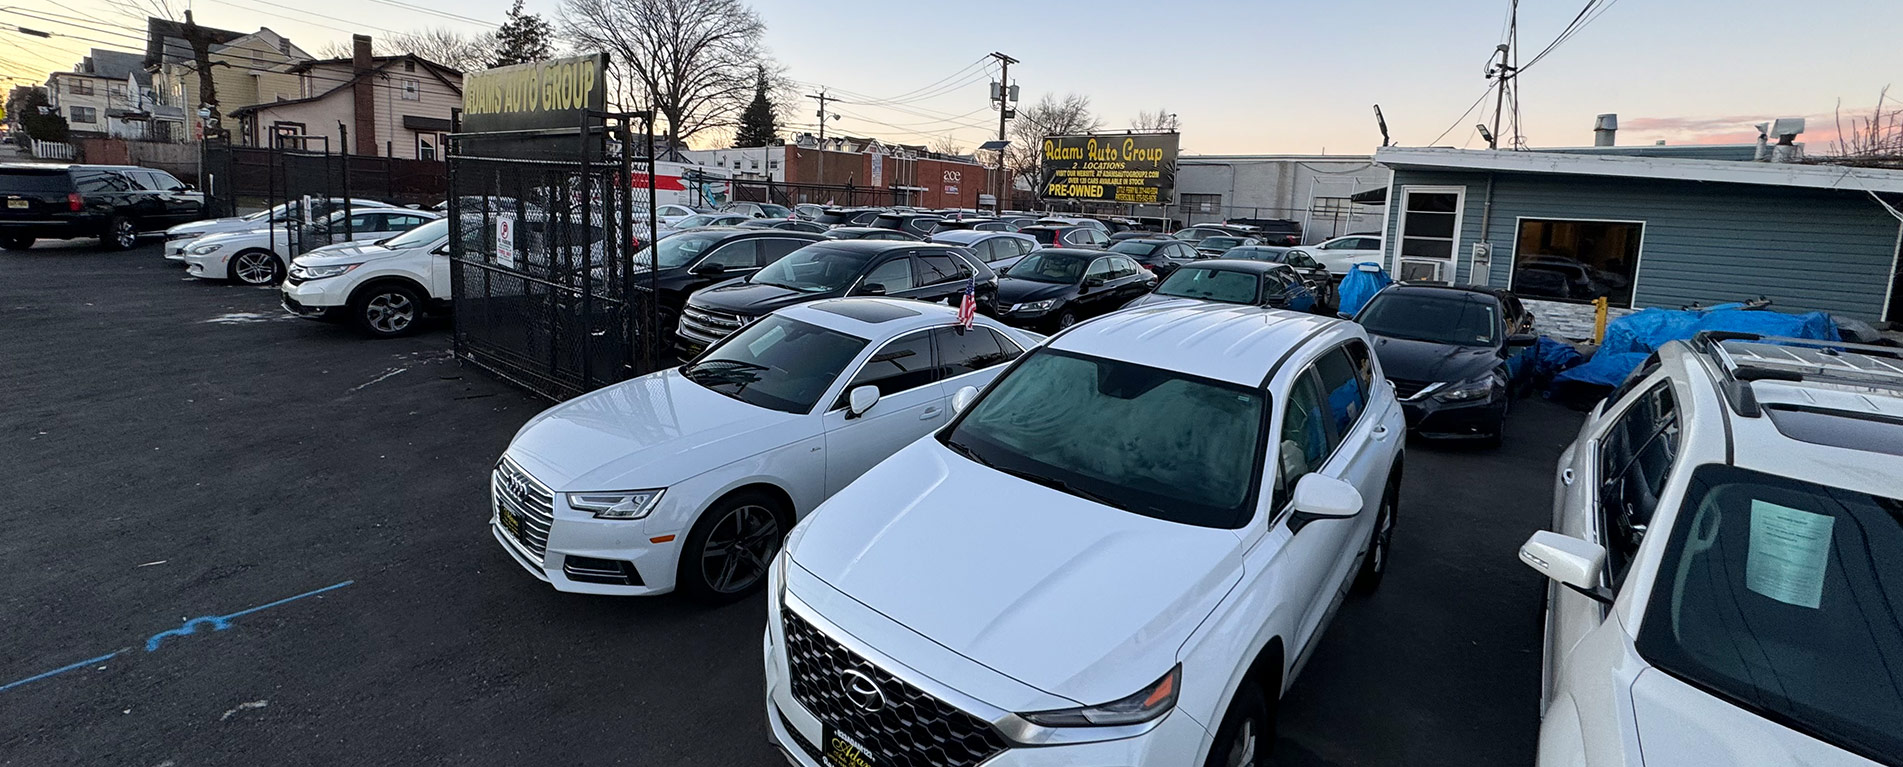 Used cars for sale in Little Ferry  | Adams Auto Group . Little Ferry  NJ